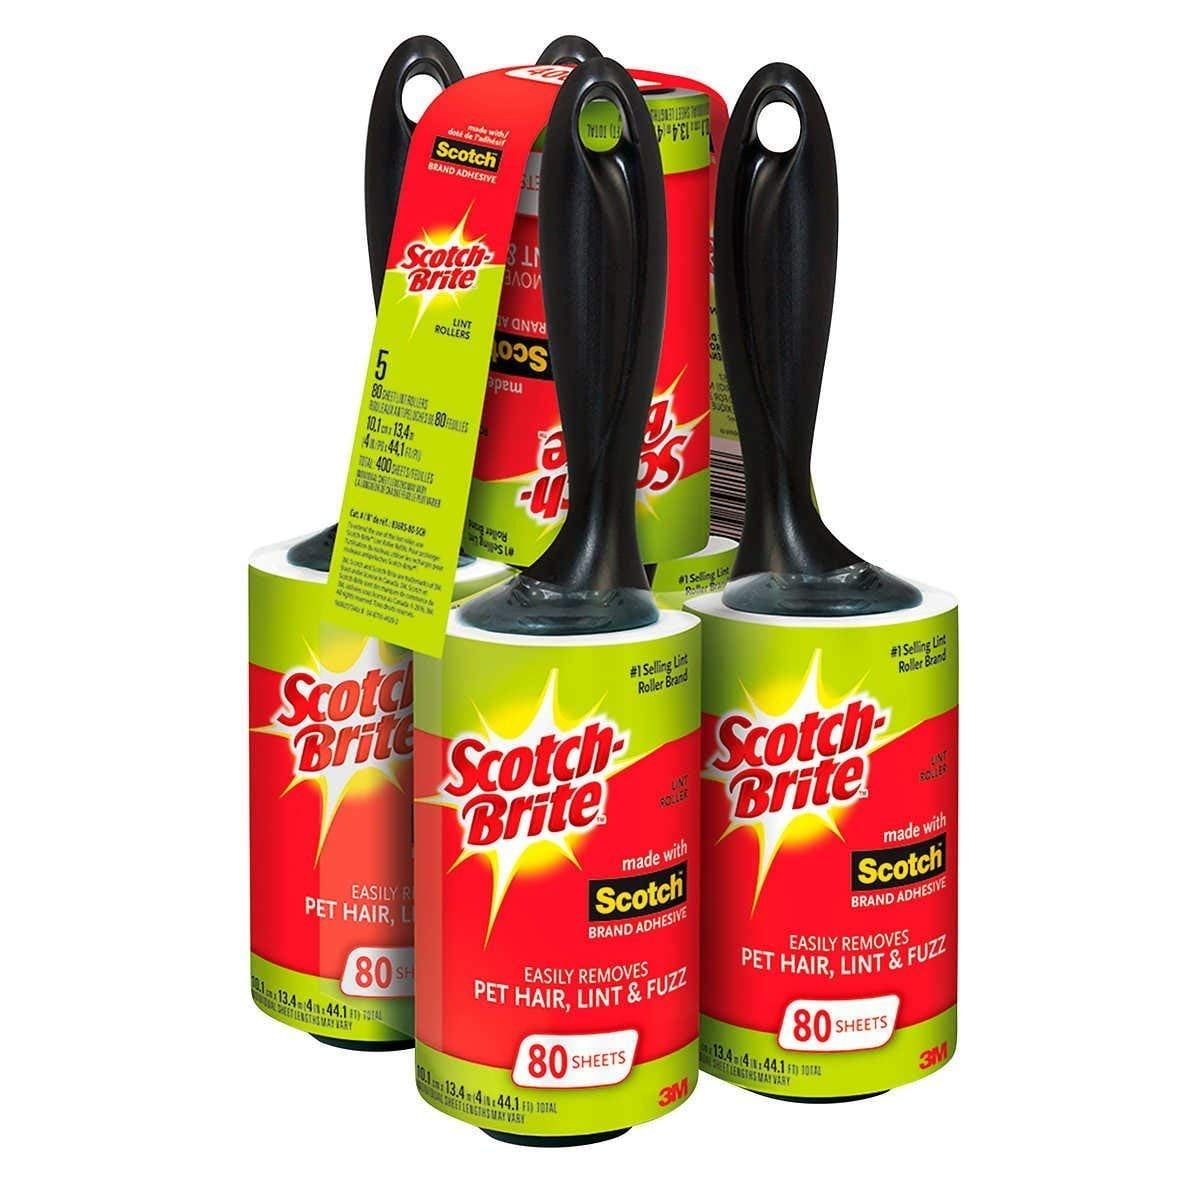 Scotch-Brite Lint Roller Value Pack 95 Shee 5 Rollers Works Great On Pet Hair 